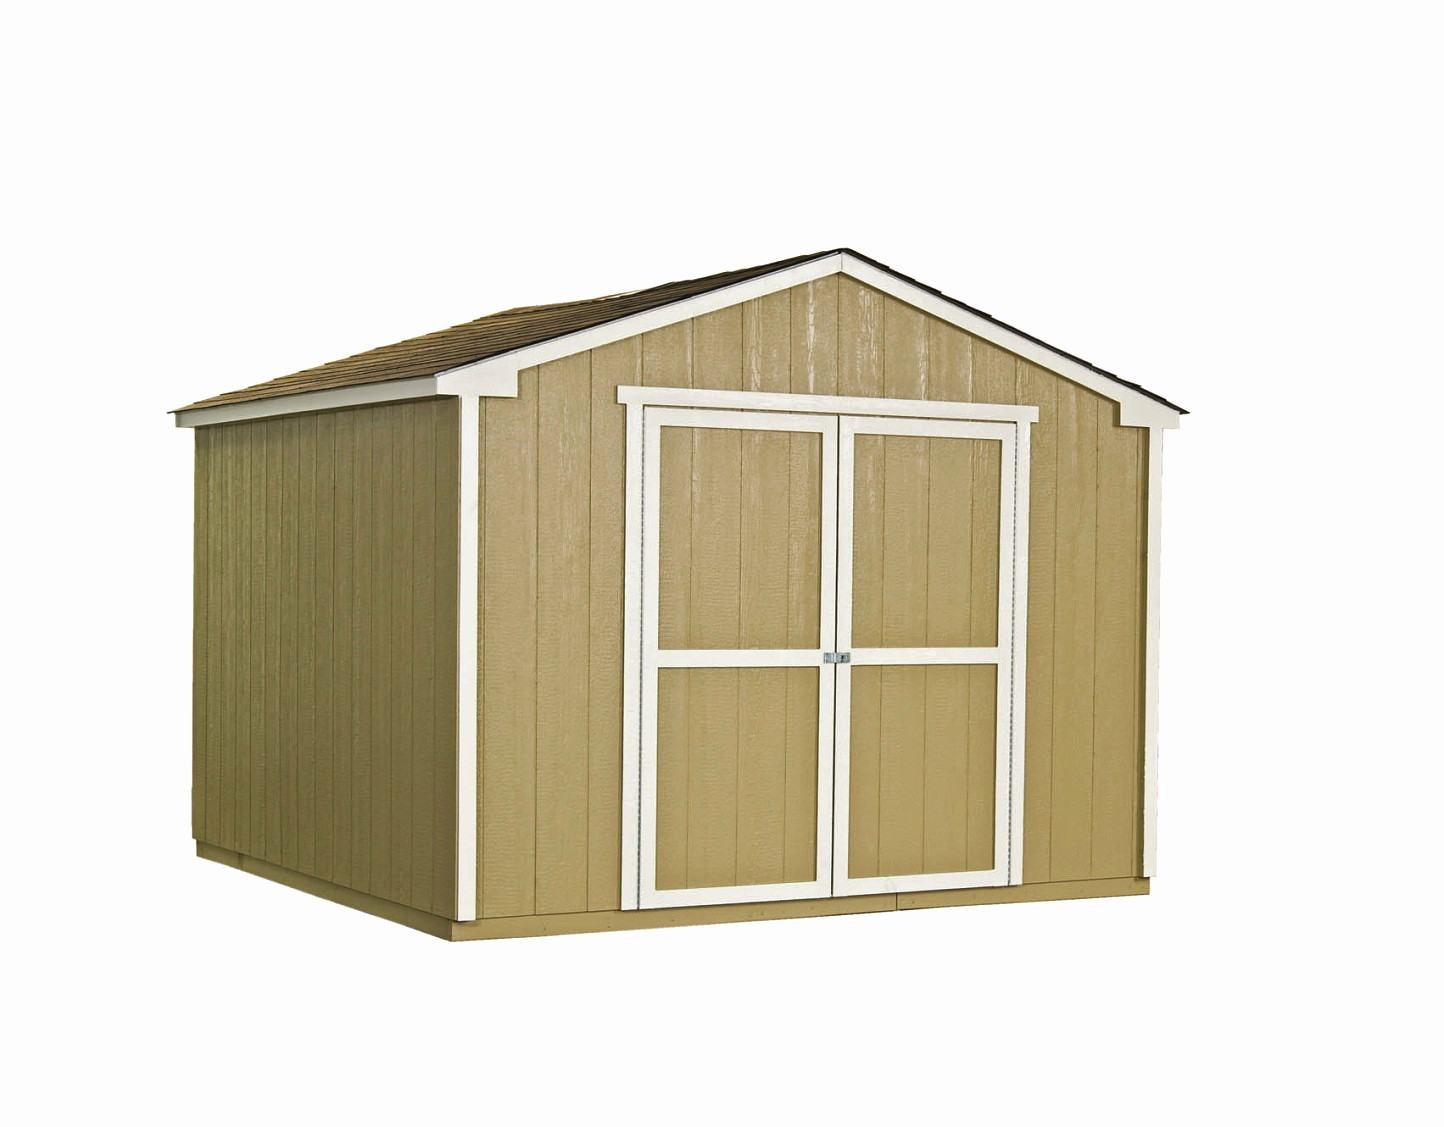 29 Famous Home Depot Hardwood Flooring Clearance 2024 free download home depot hardwood flooring clearance of home depot shed clearance new plytanium plywood siding panel t1 11 8 pertaining to home depot shed clearance luxury home depot cabins and sheds insp